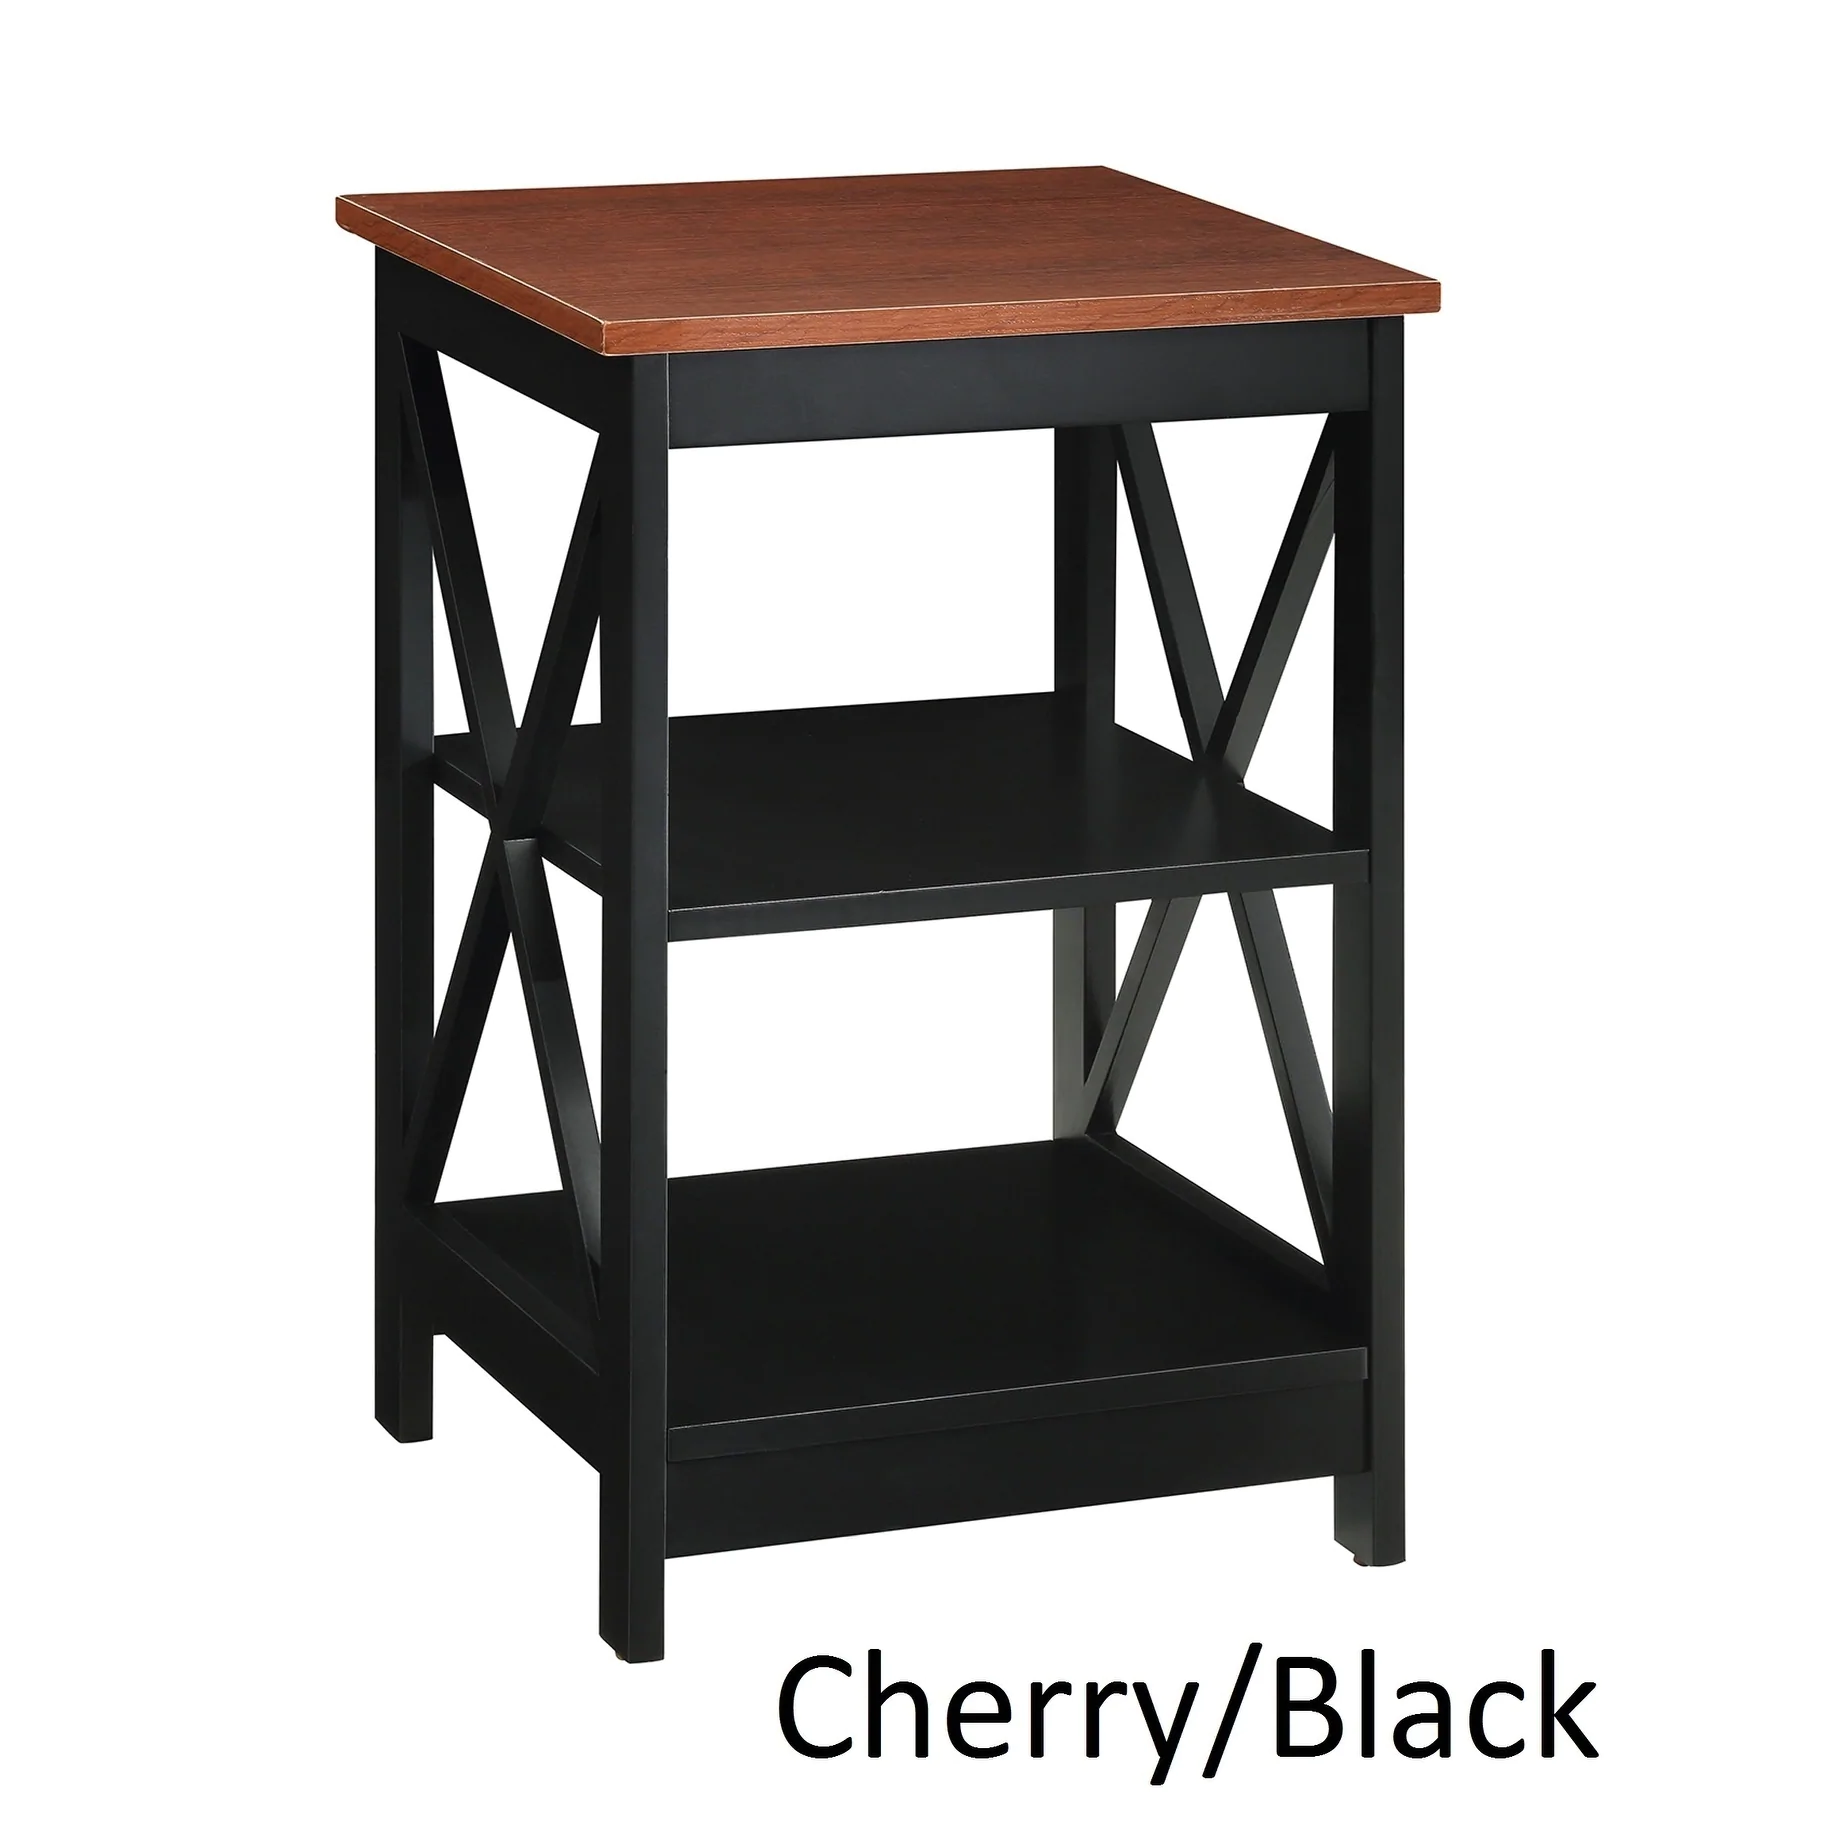 copper grove cranesbill base end table free shipping today the gray barn pitchfork accent with door allen cocktail wooden and chairs side design for drawing room nautical dining